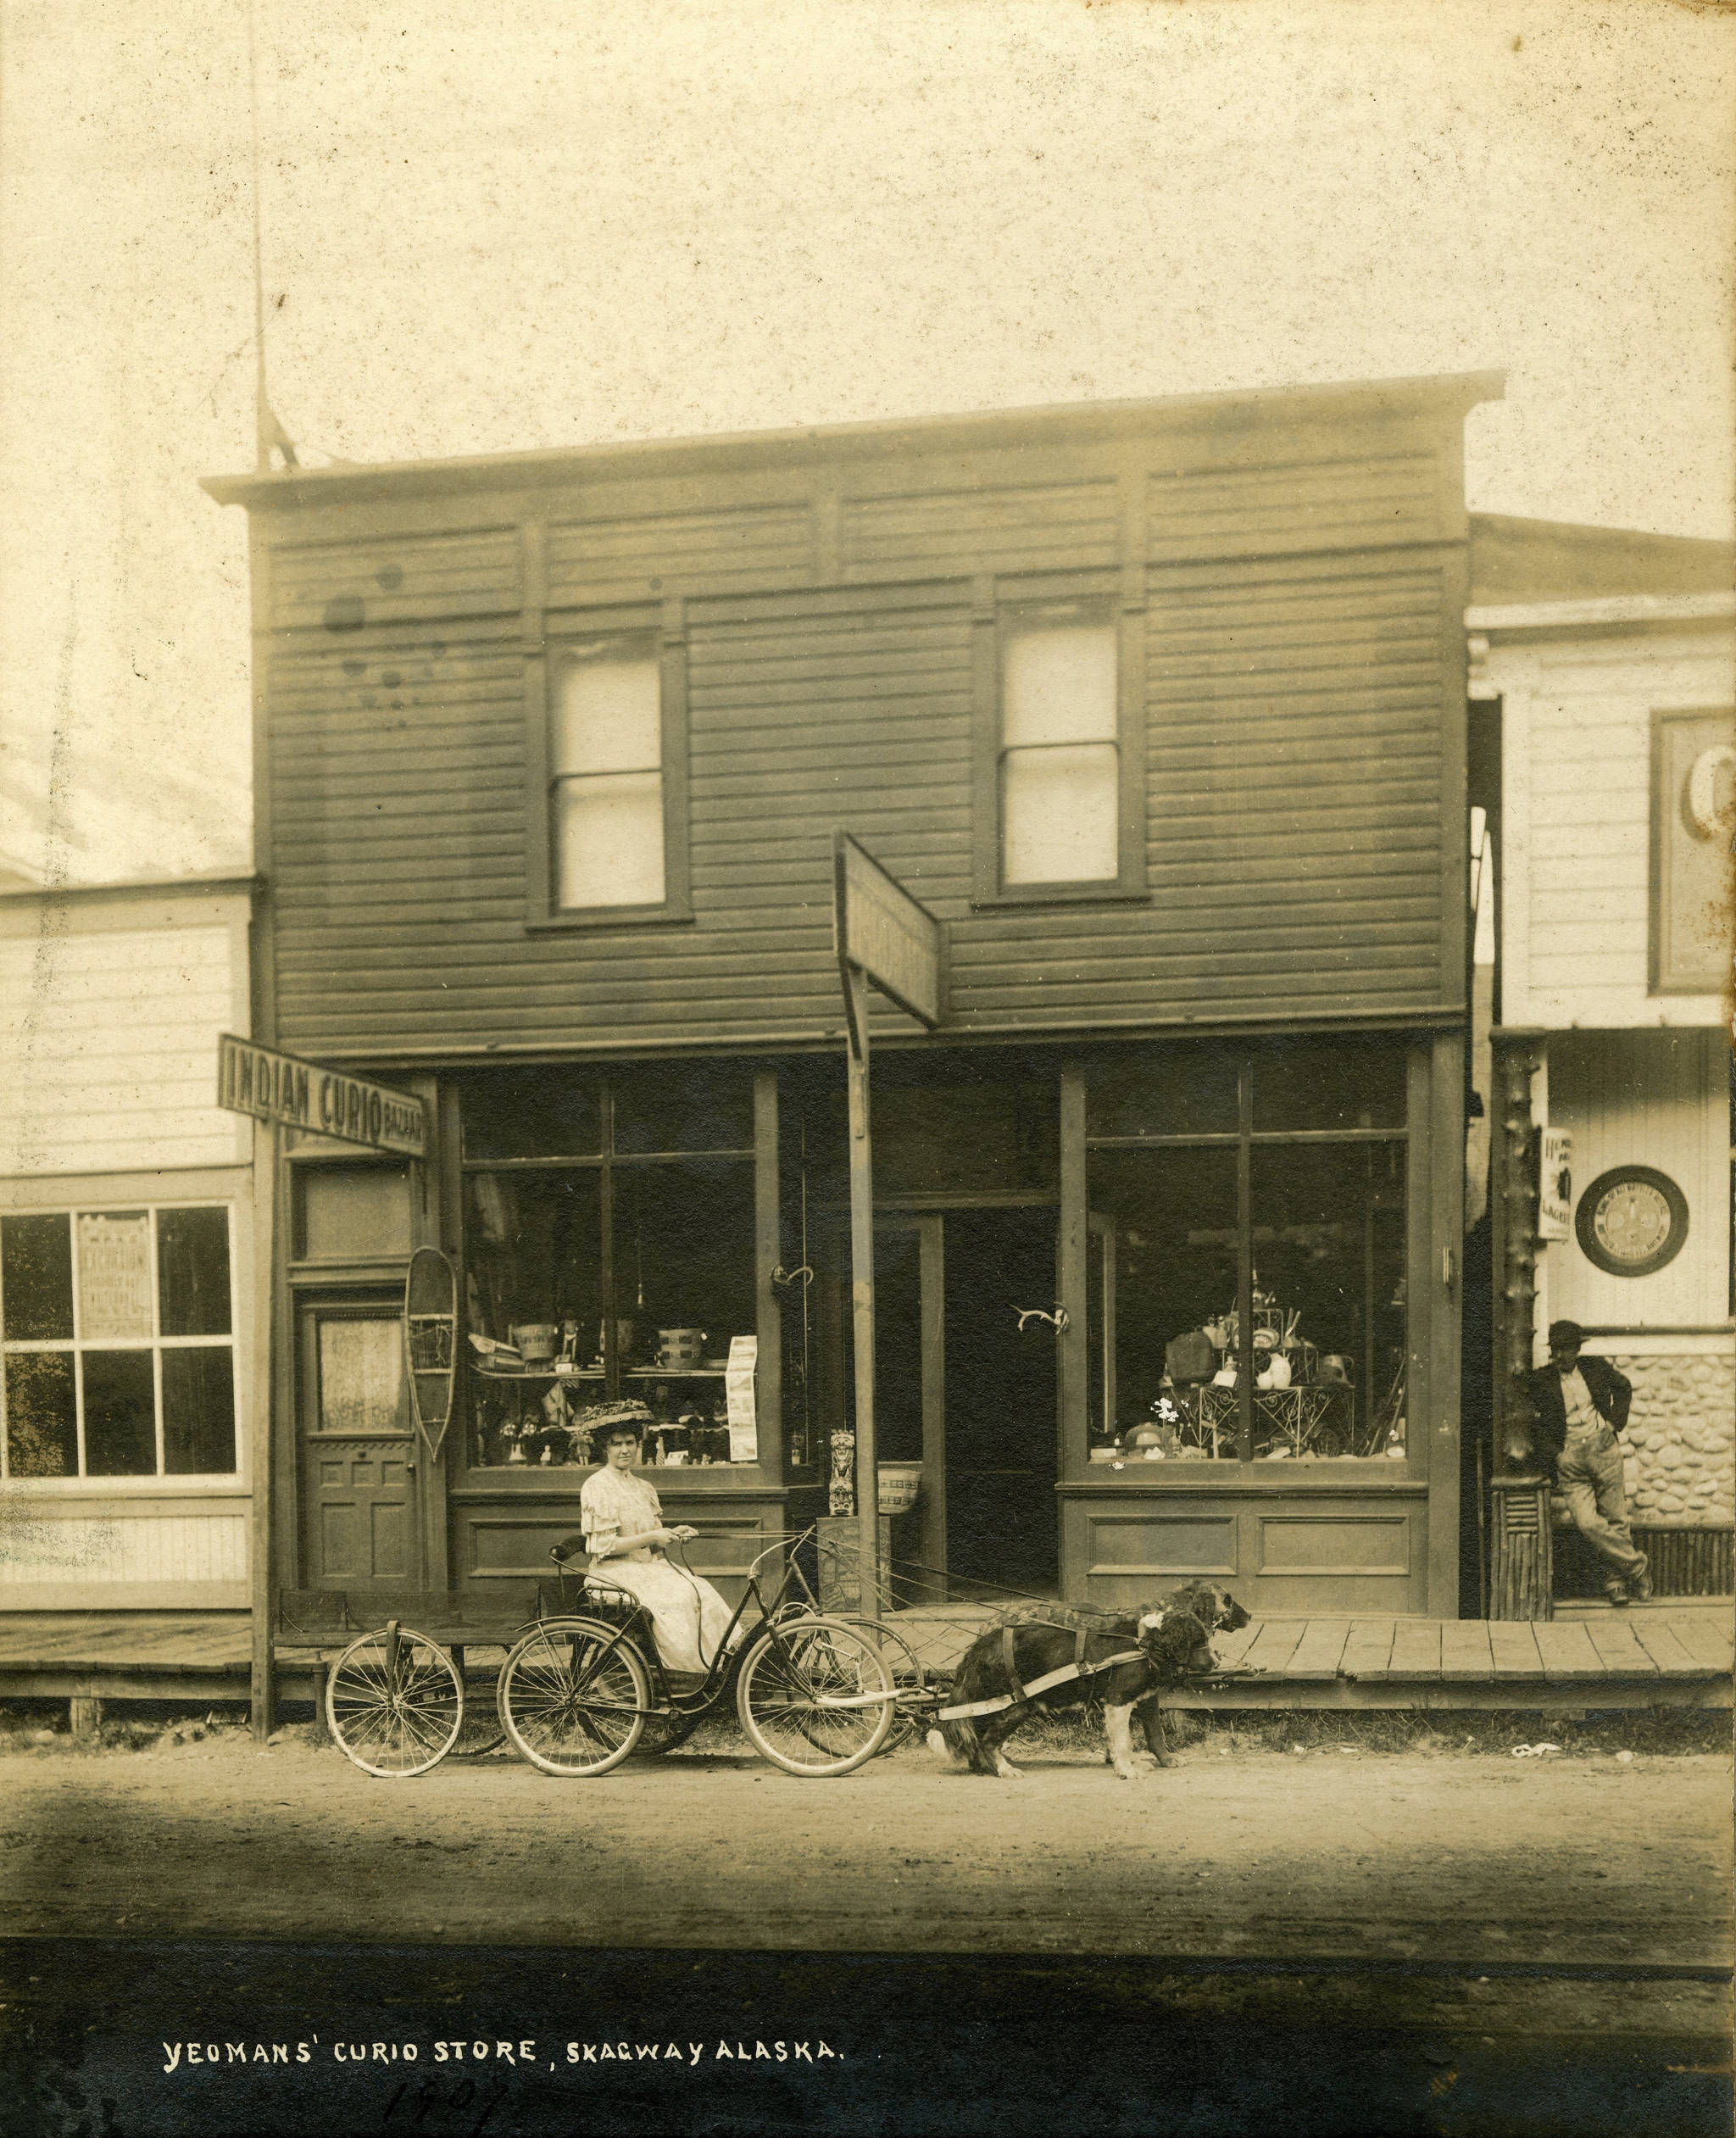 Yeomans’ Curio Store, Skagway Alaska, looking west, summer of 1907. Photo courtesy of National Park Service, Klondike Gold Rush National Historical Park, Yeomans Collection, KLGO 58599.